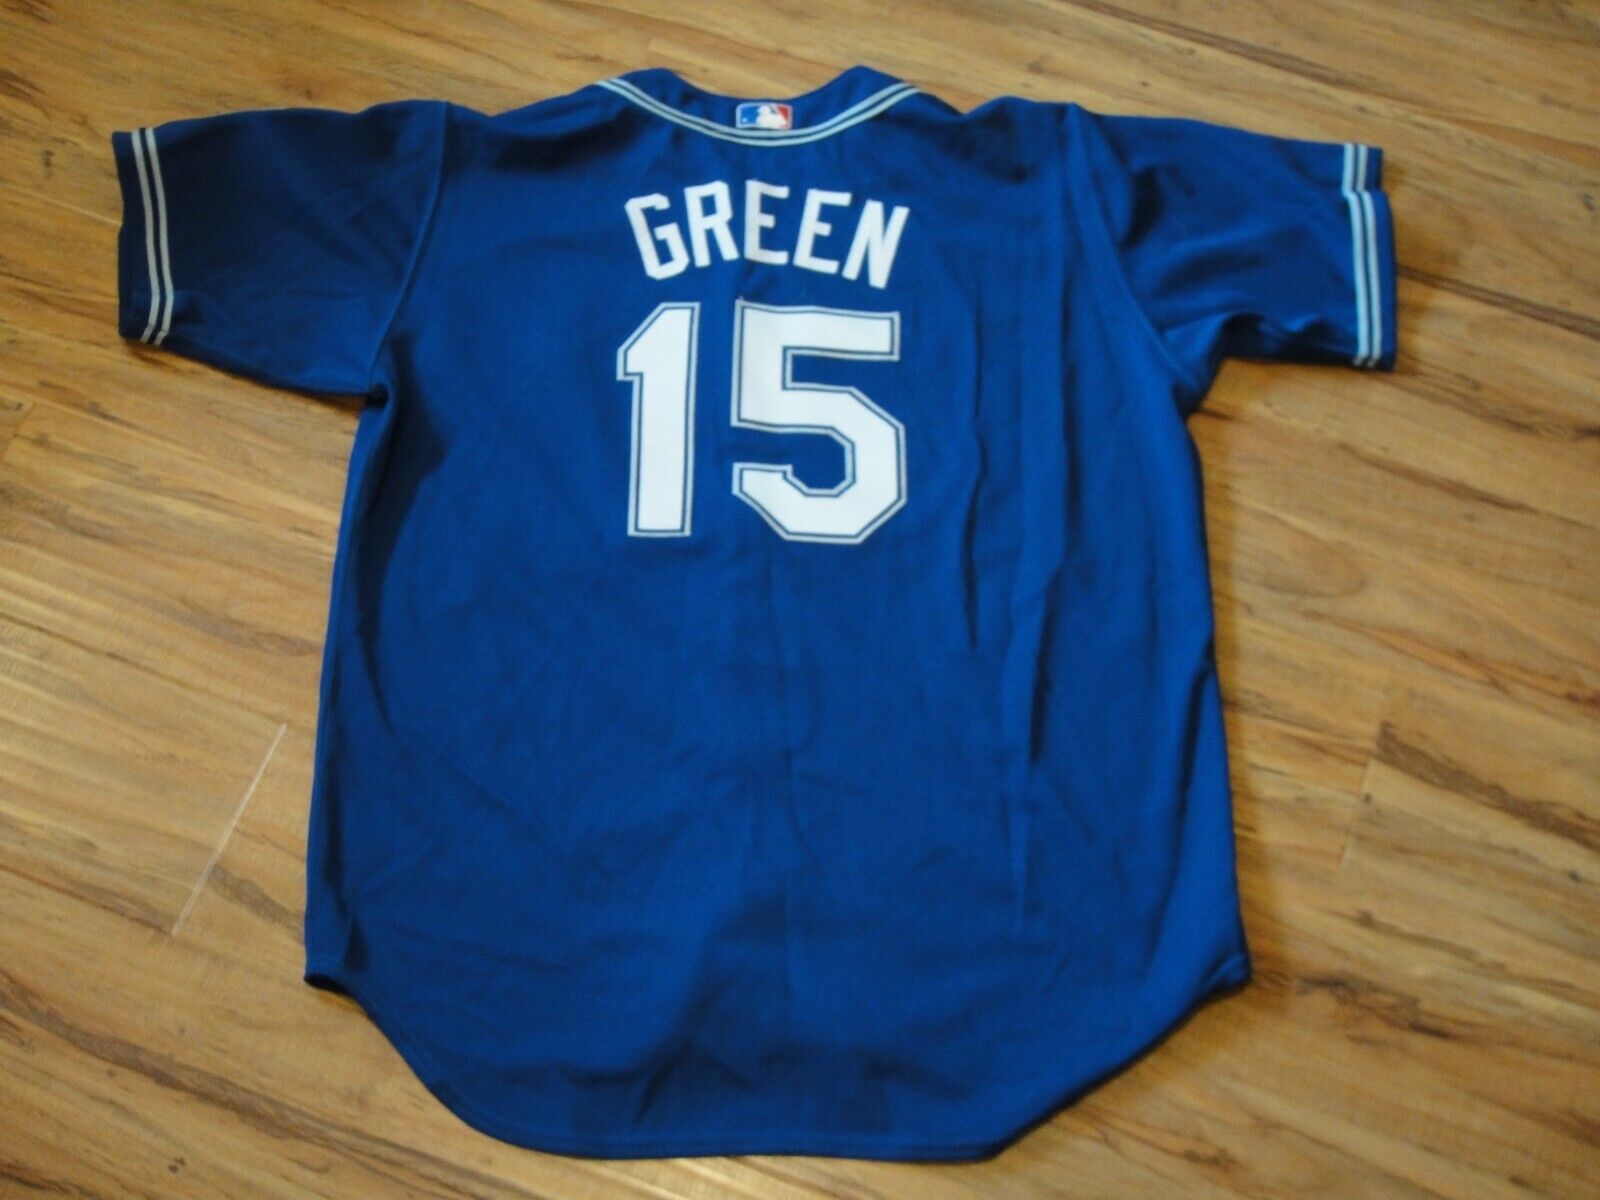 SHAWN GREEN GAME USED WORN 2000 LOS ANGELES DODGERS JERSEY GREY FLANNEL LETTER